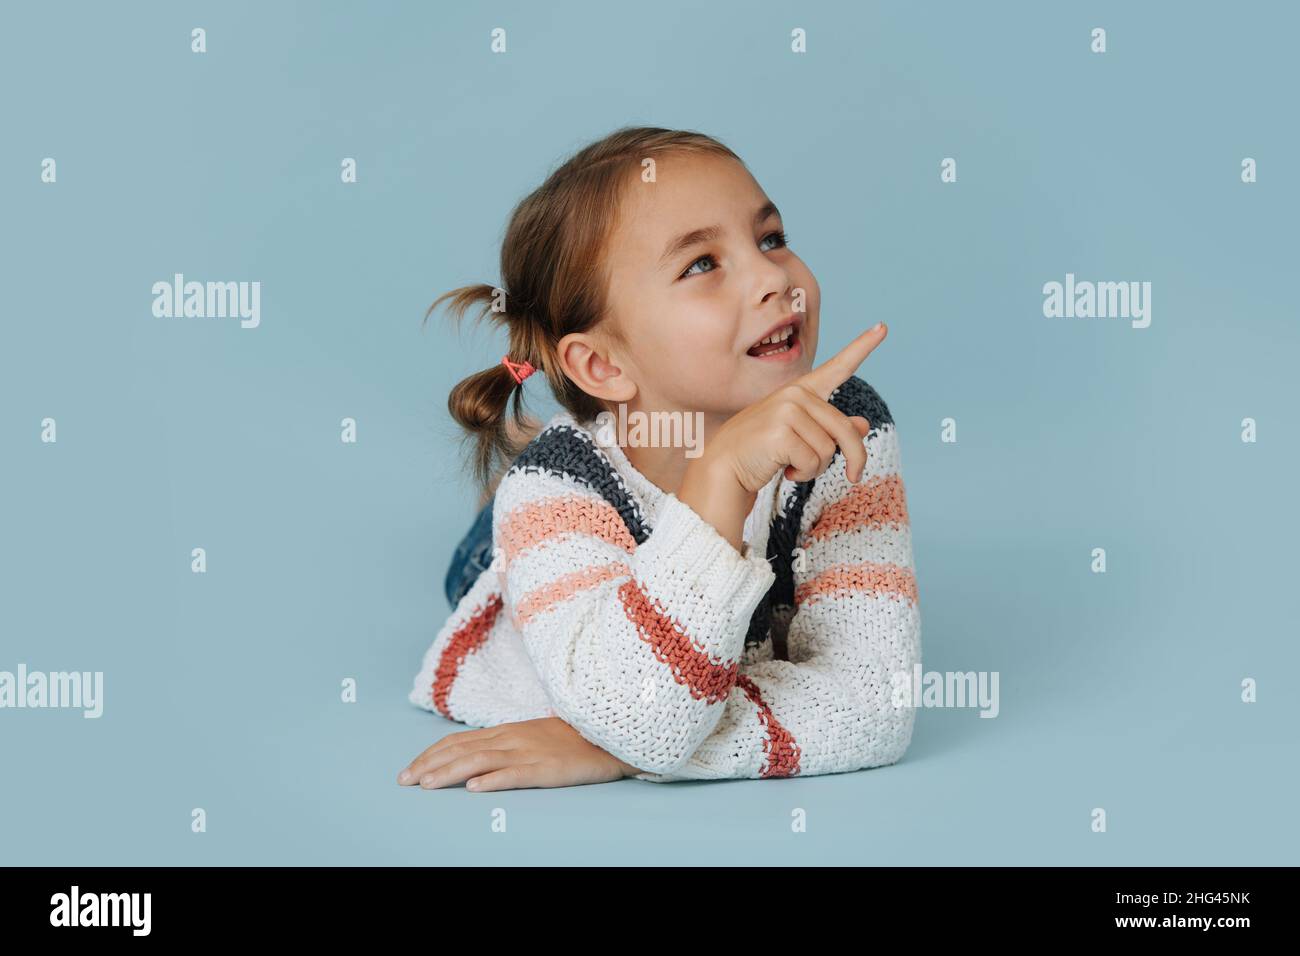 Social little girl in striped sweater lying on the floor over blue background. Talking to someone while articulating with her index finger. Stock Photo